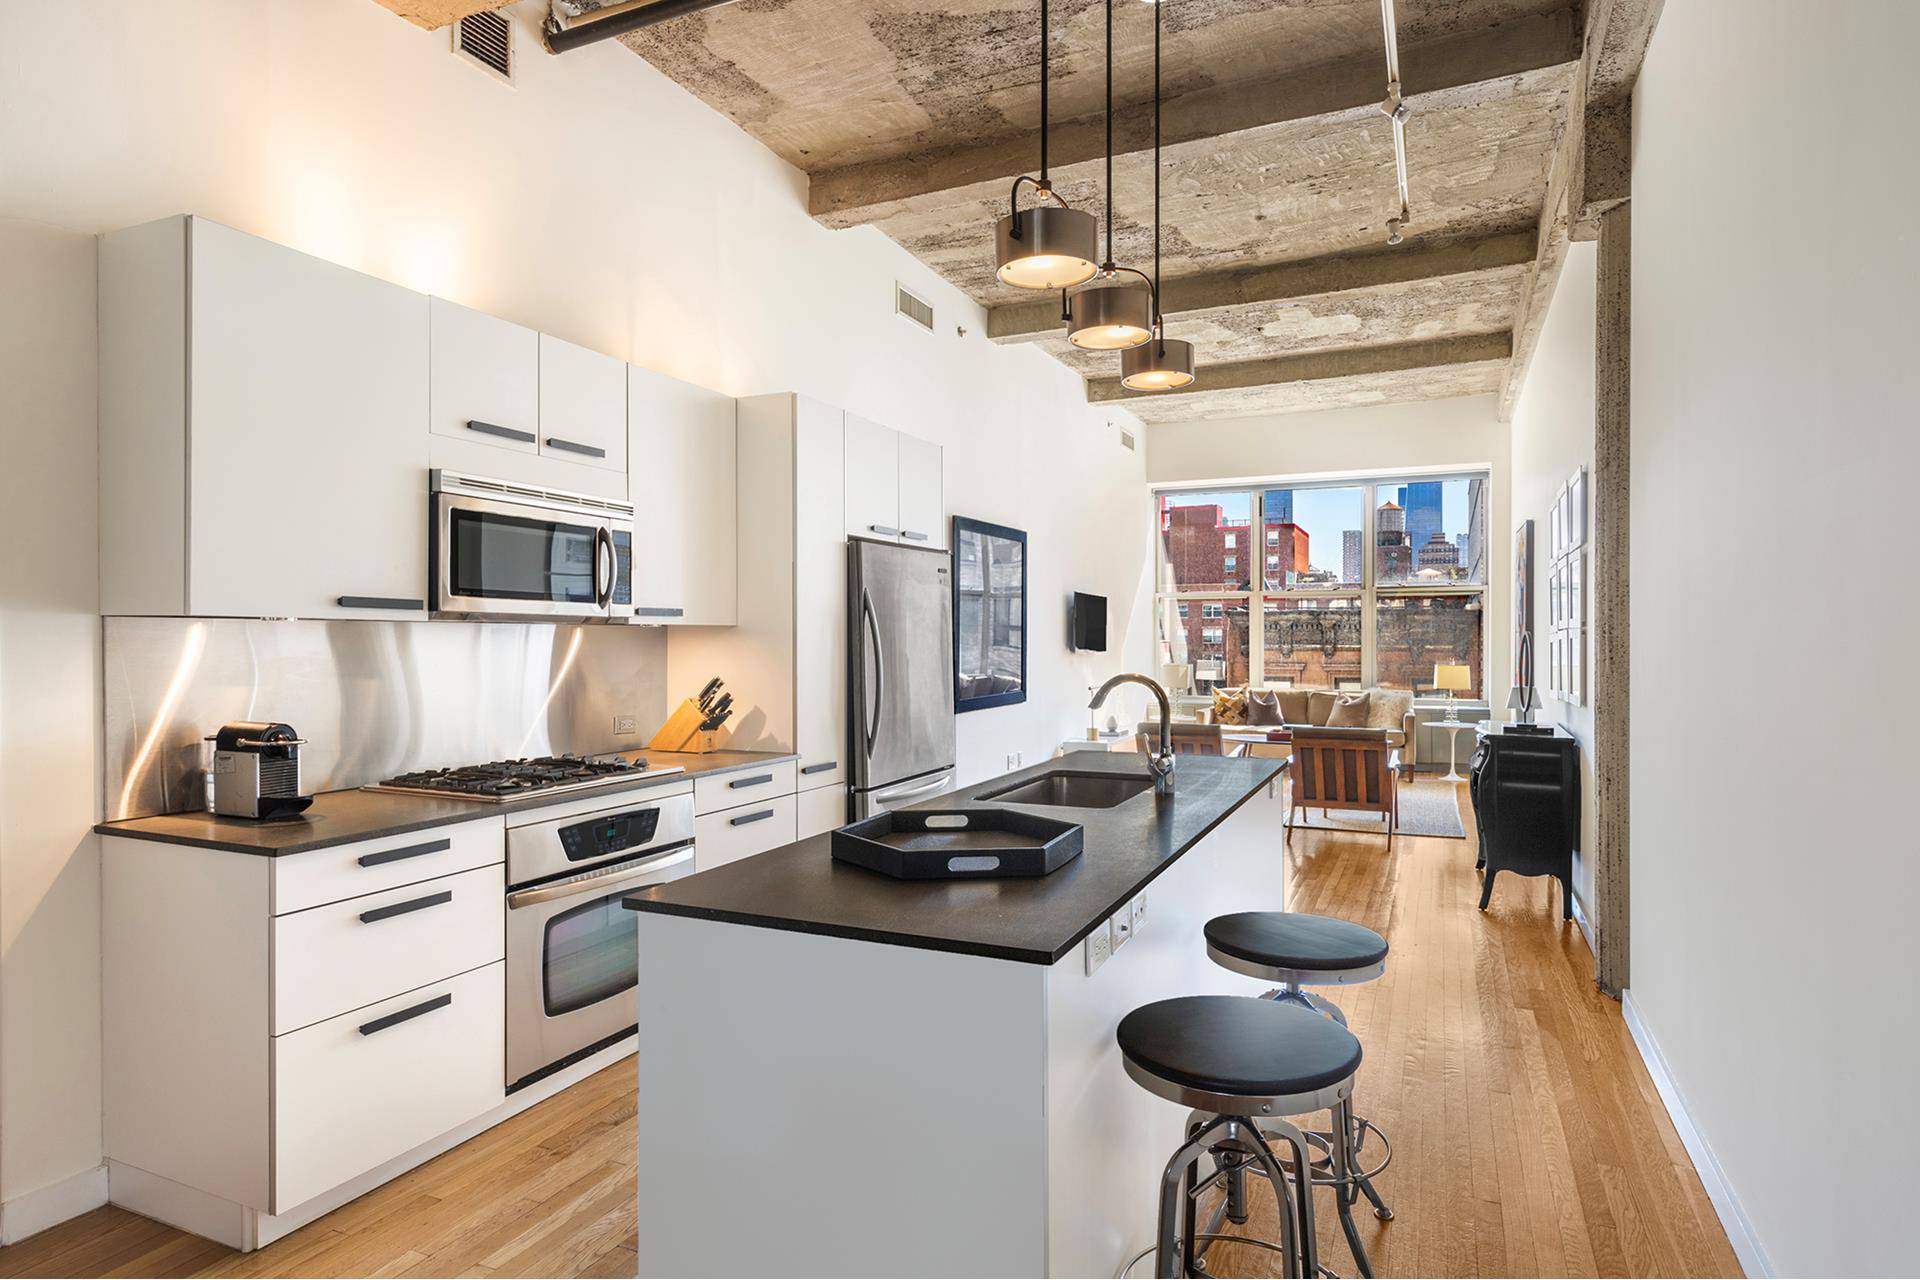 Furnished Rental A spectacular and Spacious Midtown Loft with 12 foot ceilings is a rare find !